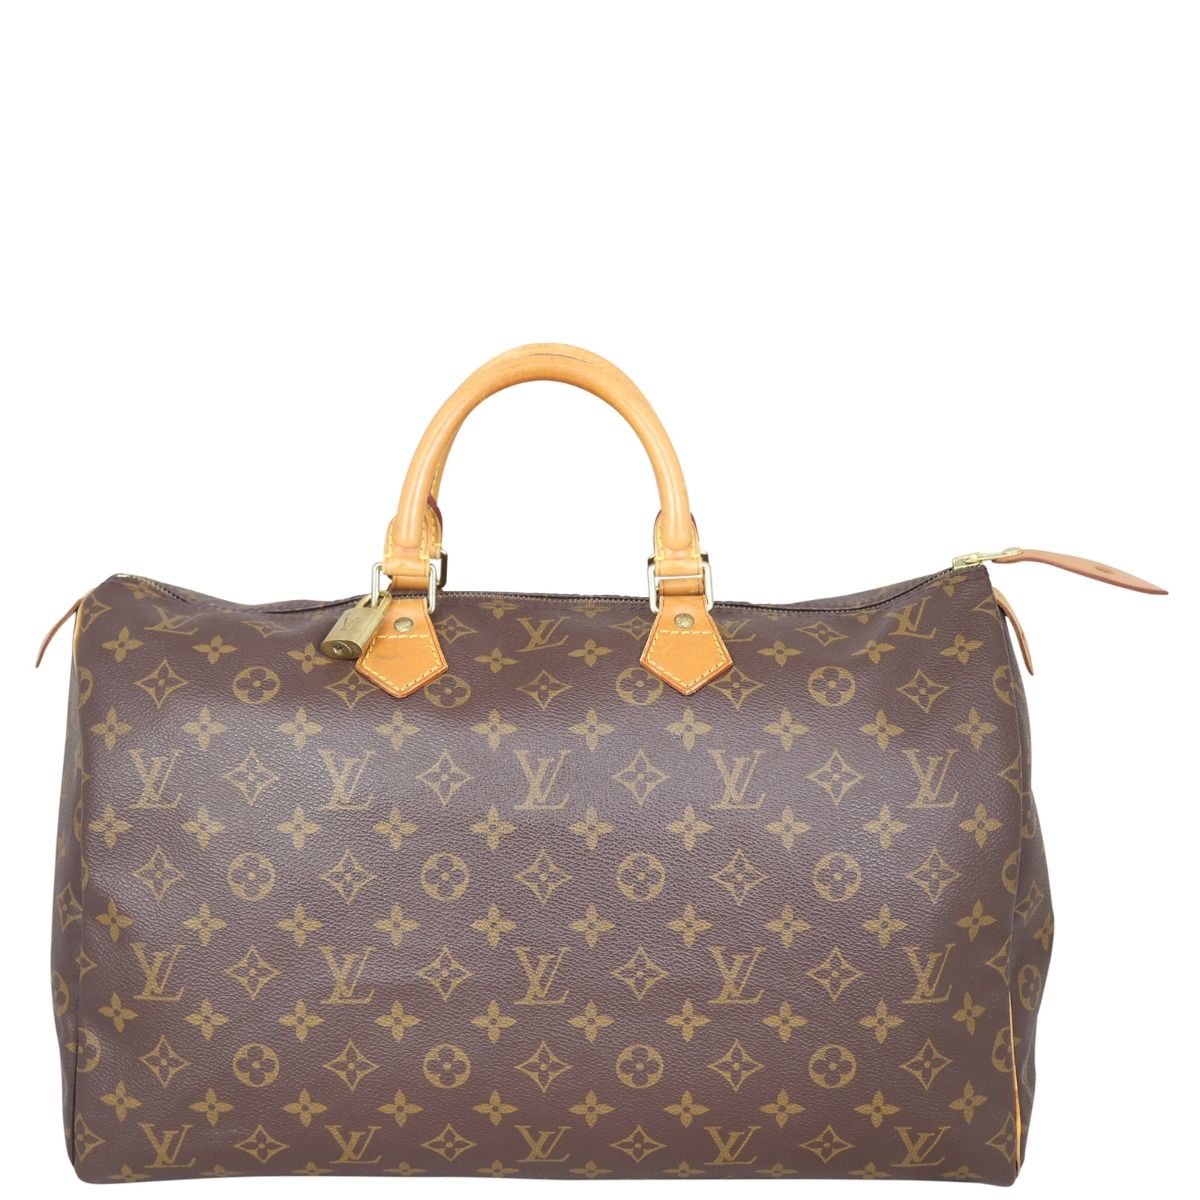 TK Maxx shopper stunned by reduced price of Louis Vuitton bag worth 1100